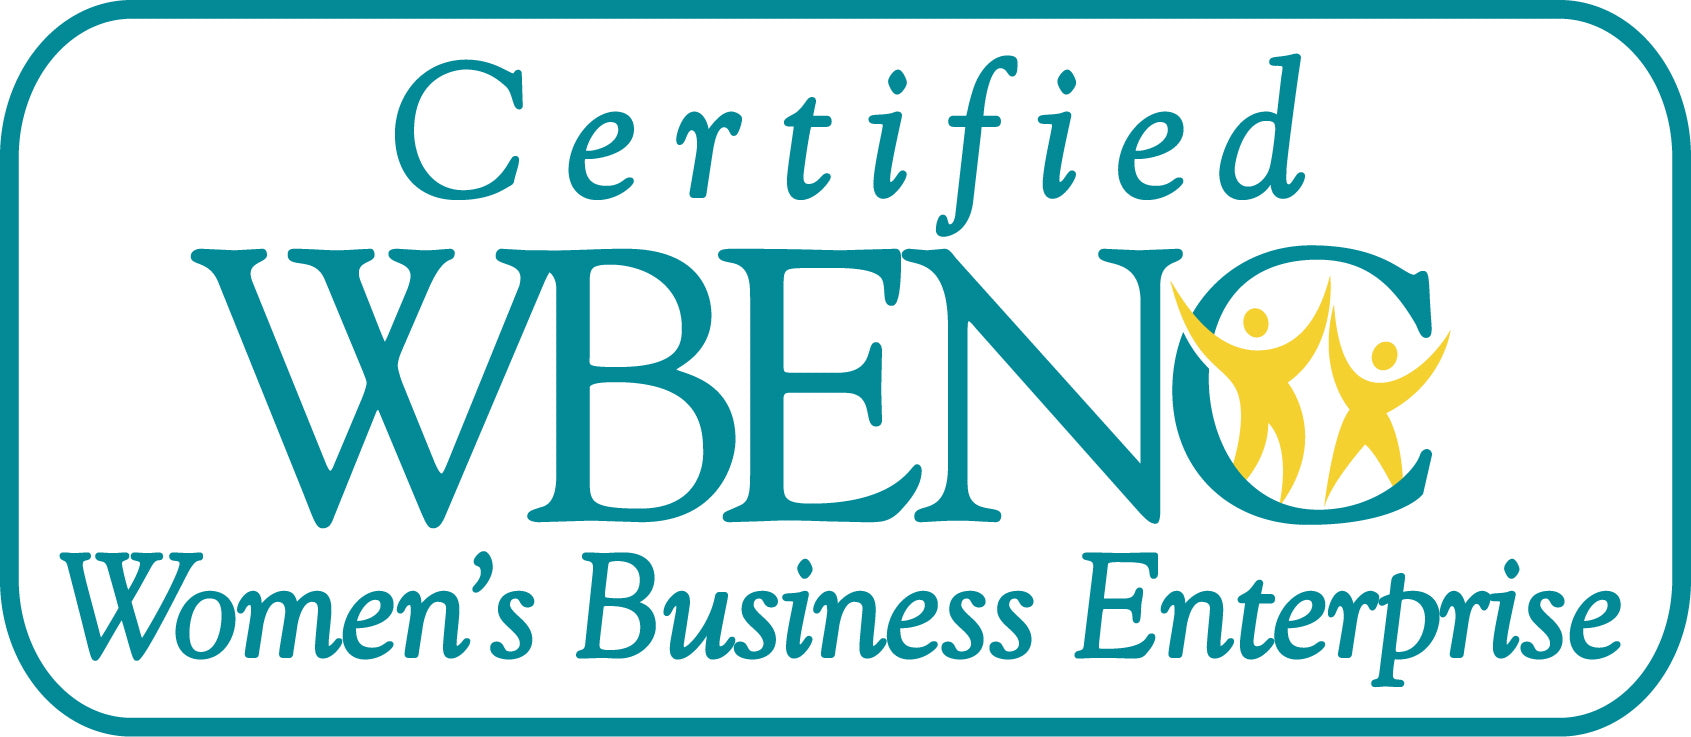 Exciting News!  Check Out Our New Certification as a Women Owned Business!